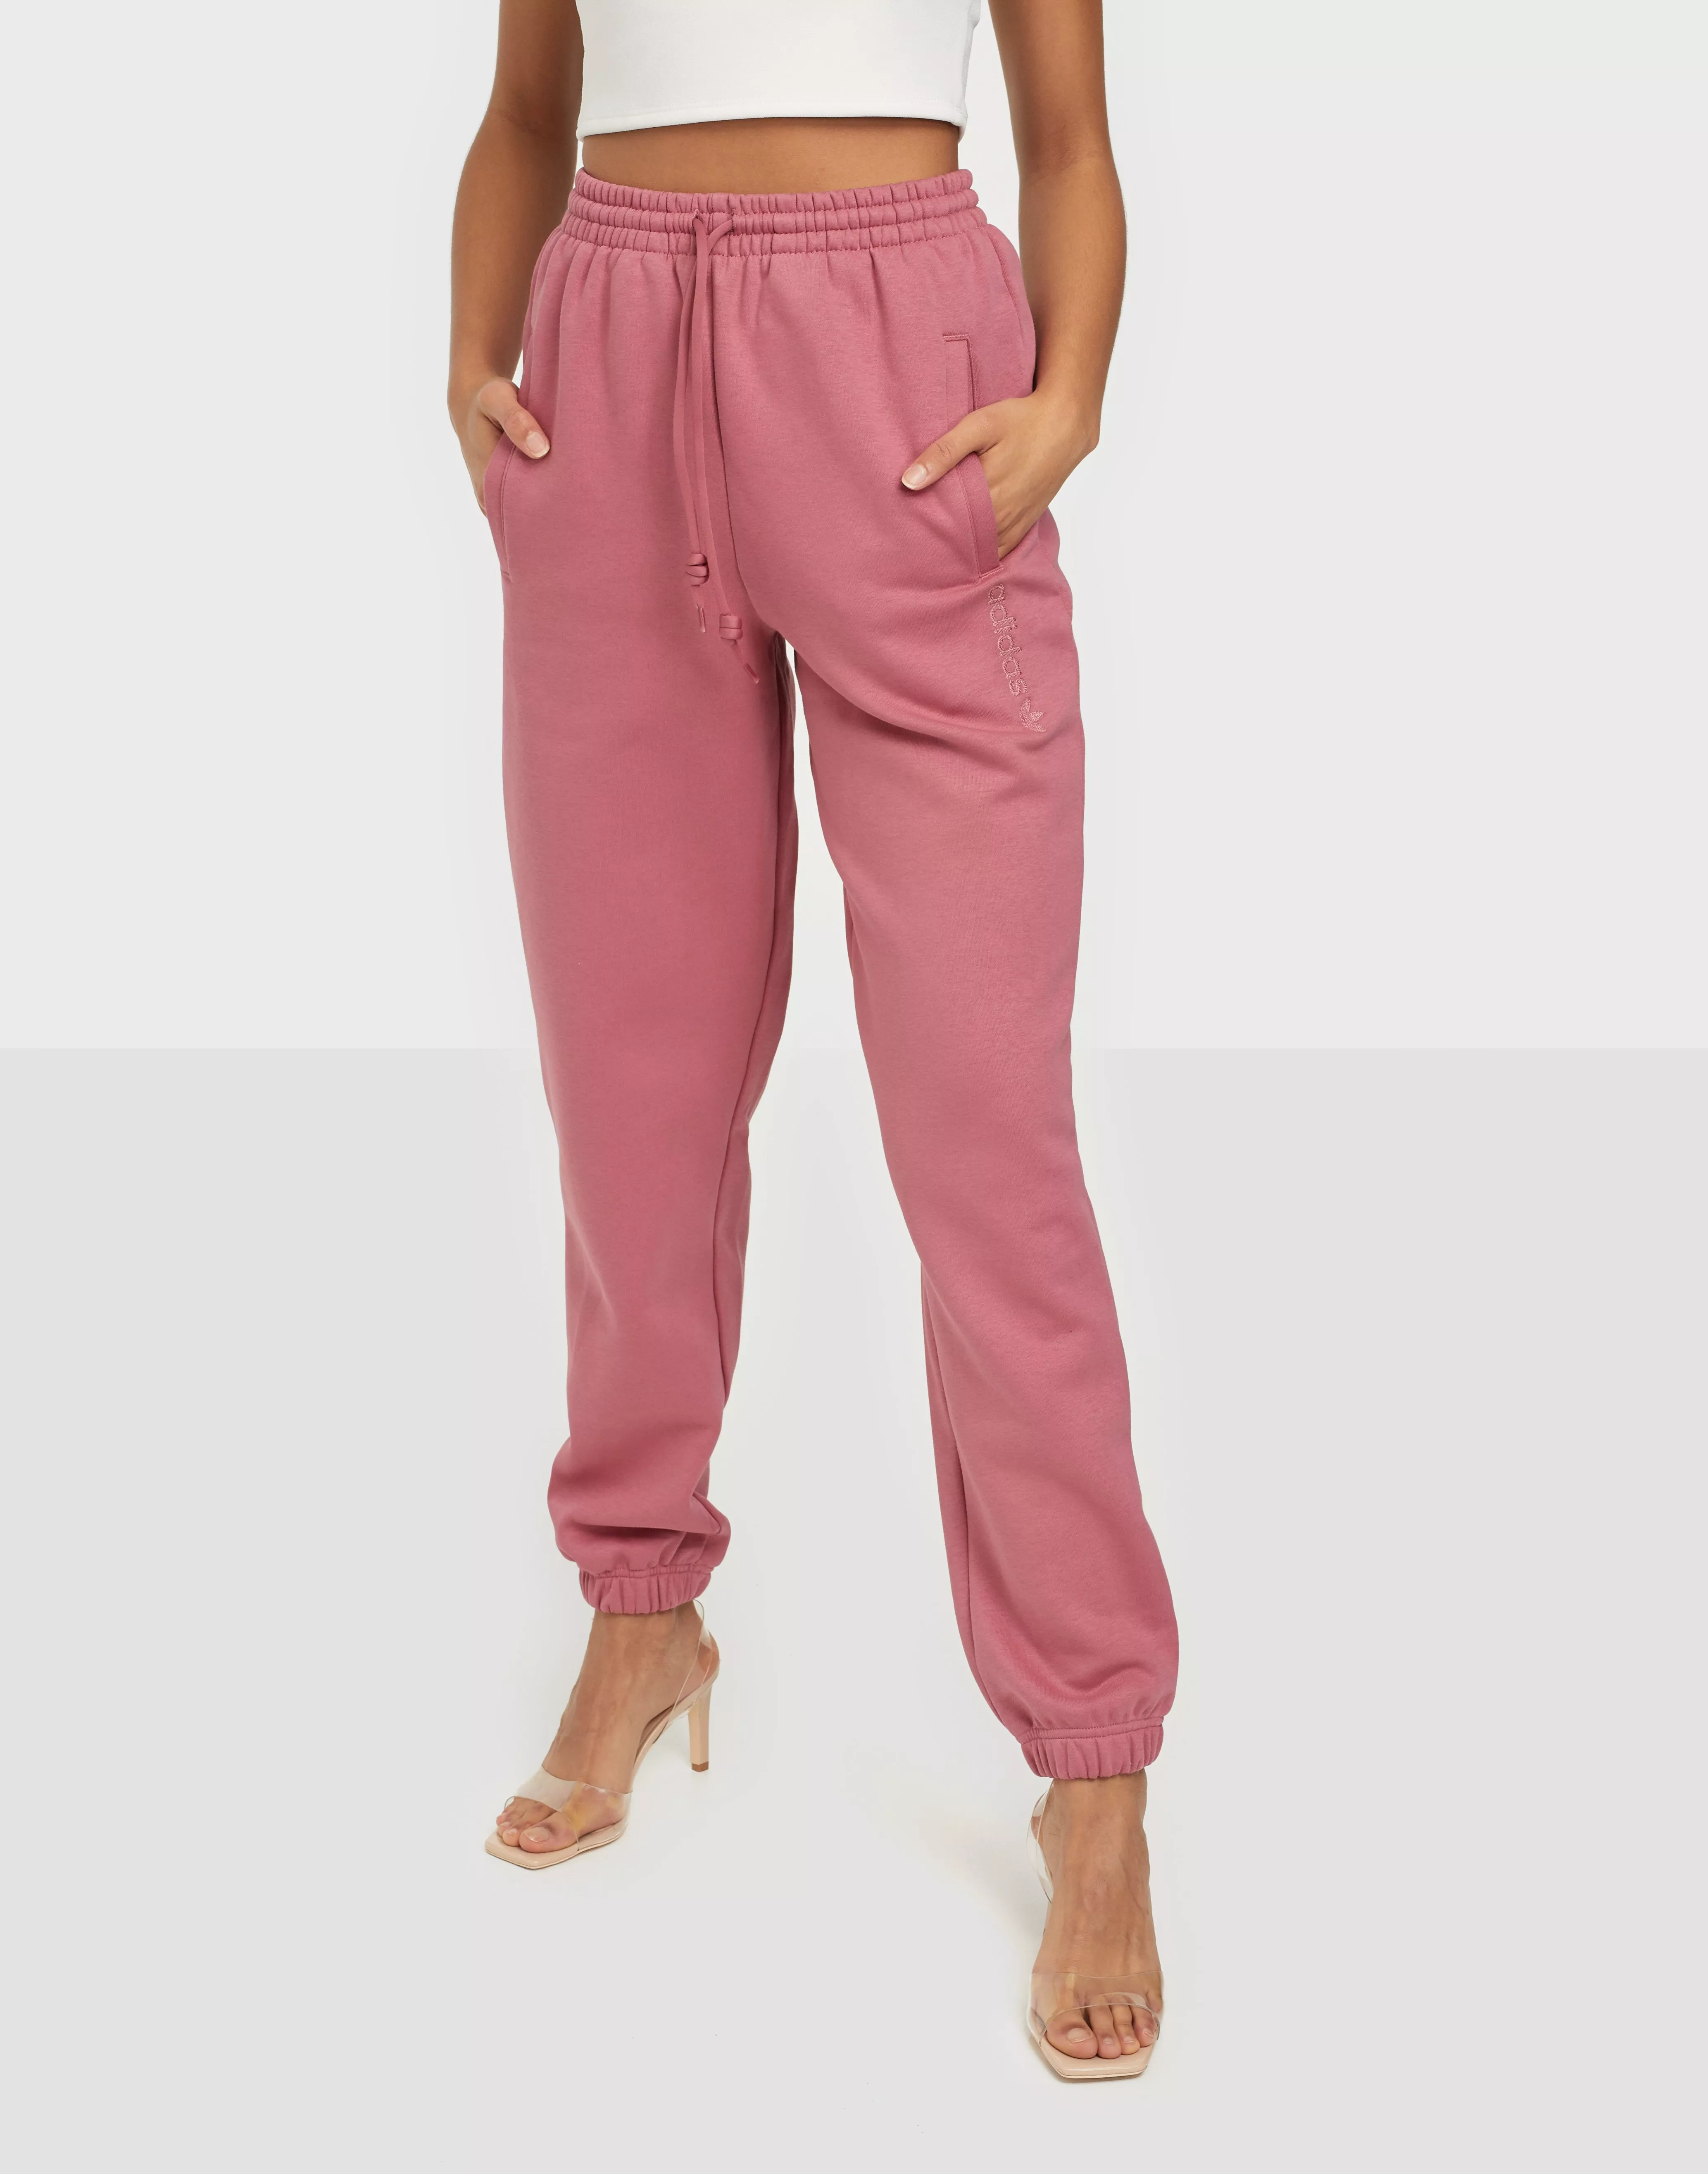 Buy Adidas PANTS - Pink | Nelly.com